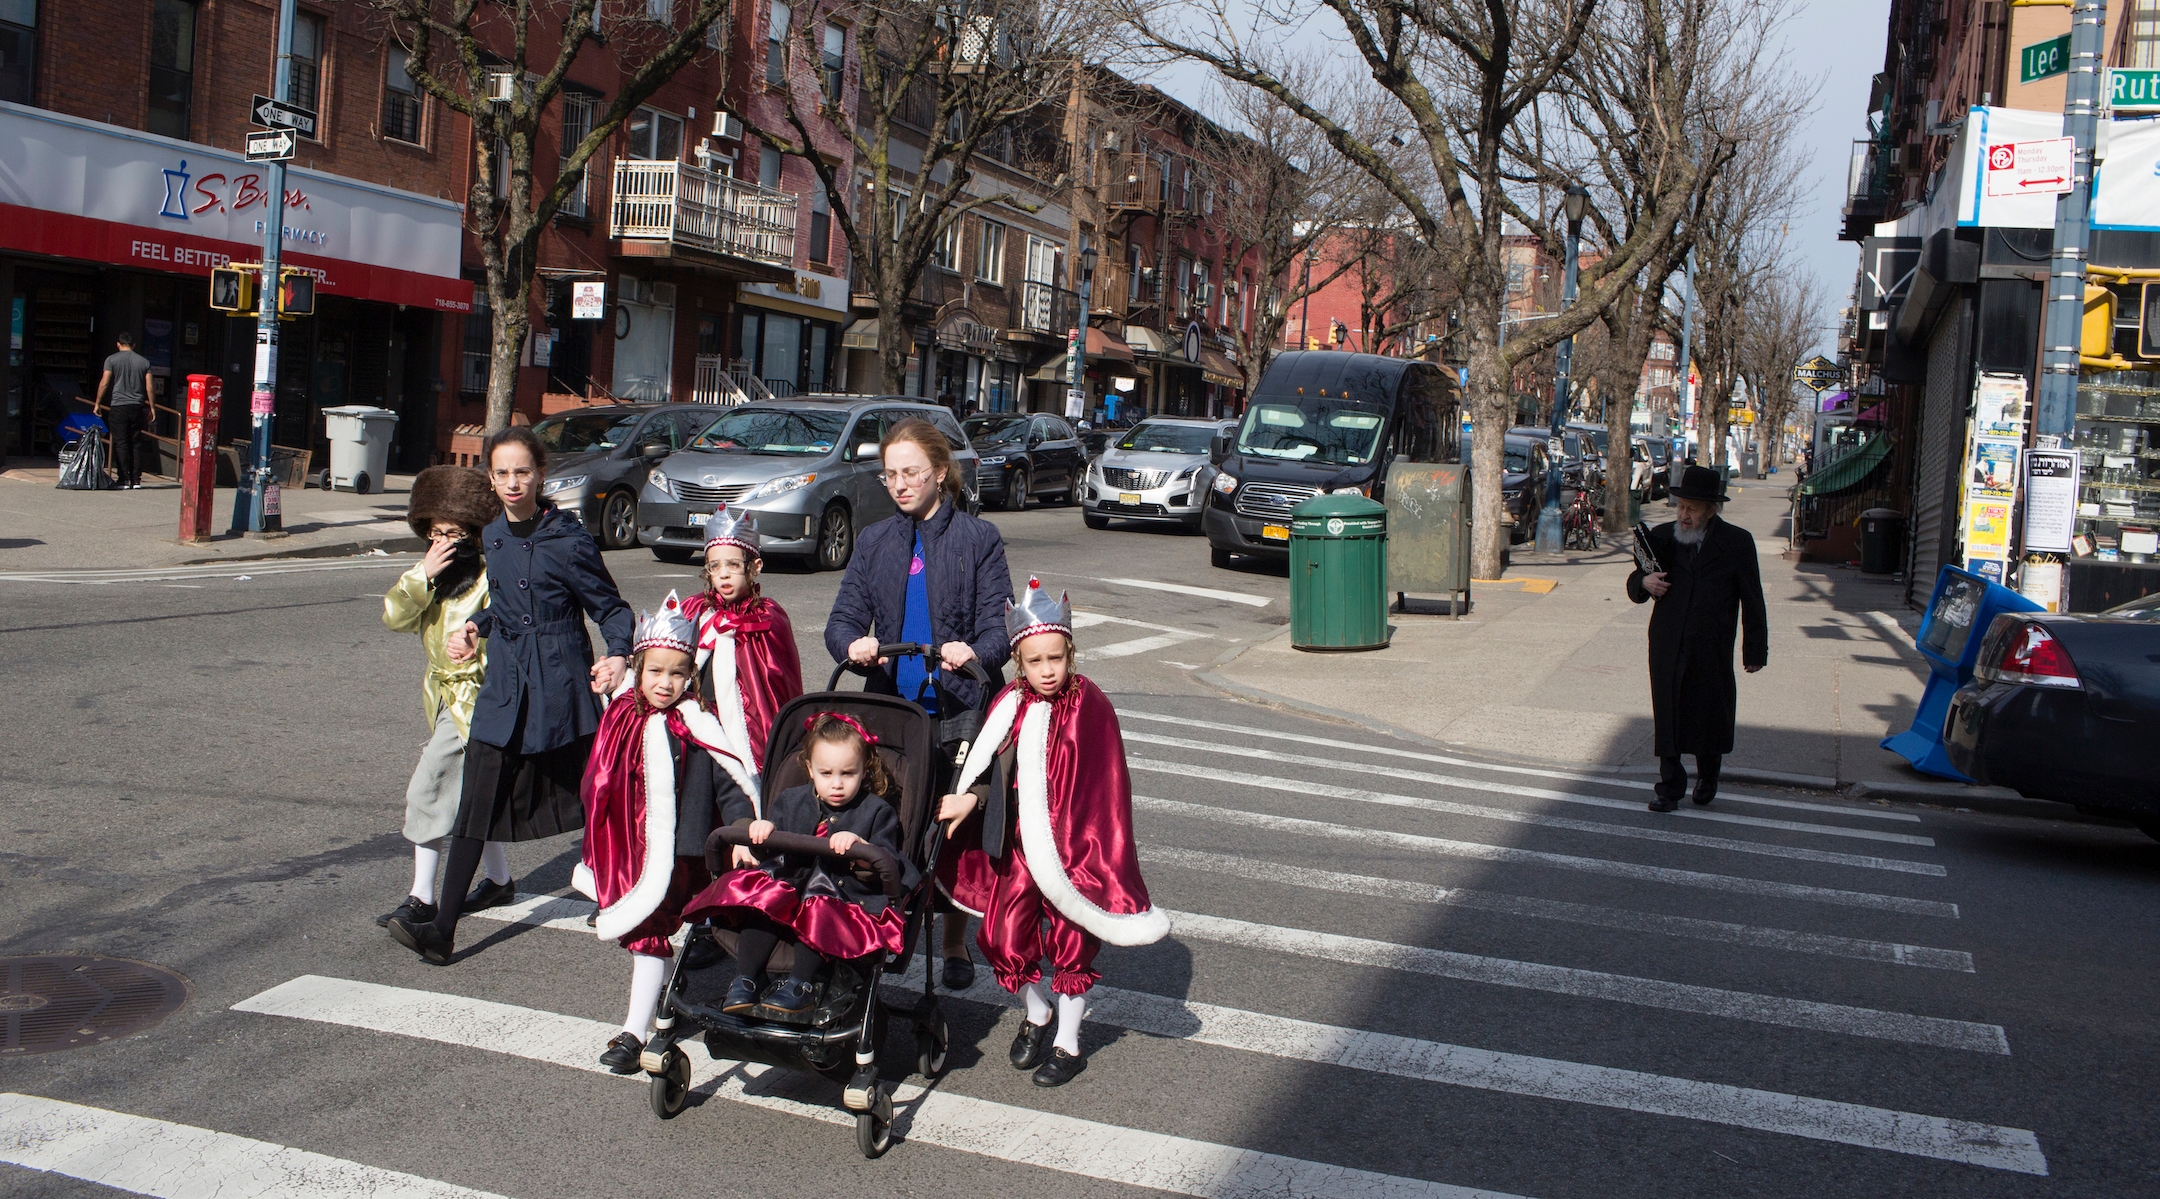 A Hasidic family, dressed up for Purim, crosses the street on March 10, 2020 in the Brooklyn neighborhood of Williamsburg. (Andrew Lichtenstein/Getty Images)